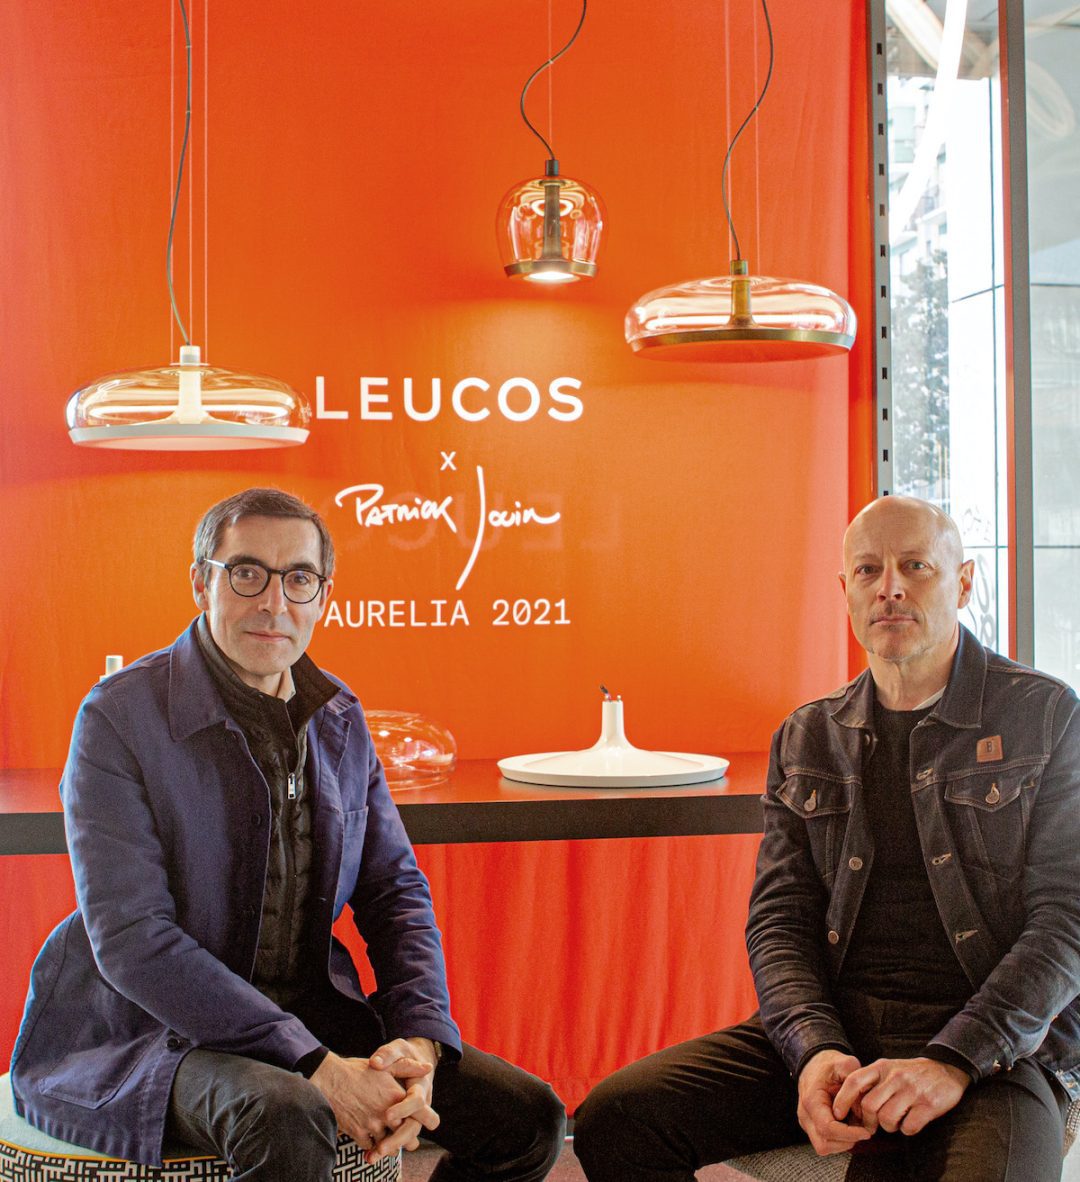 Patrick Jouin and Leucos: the new light